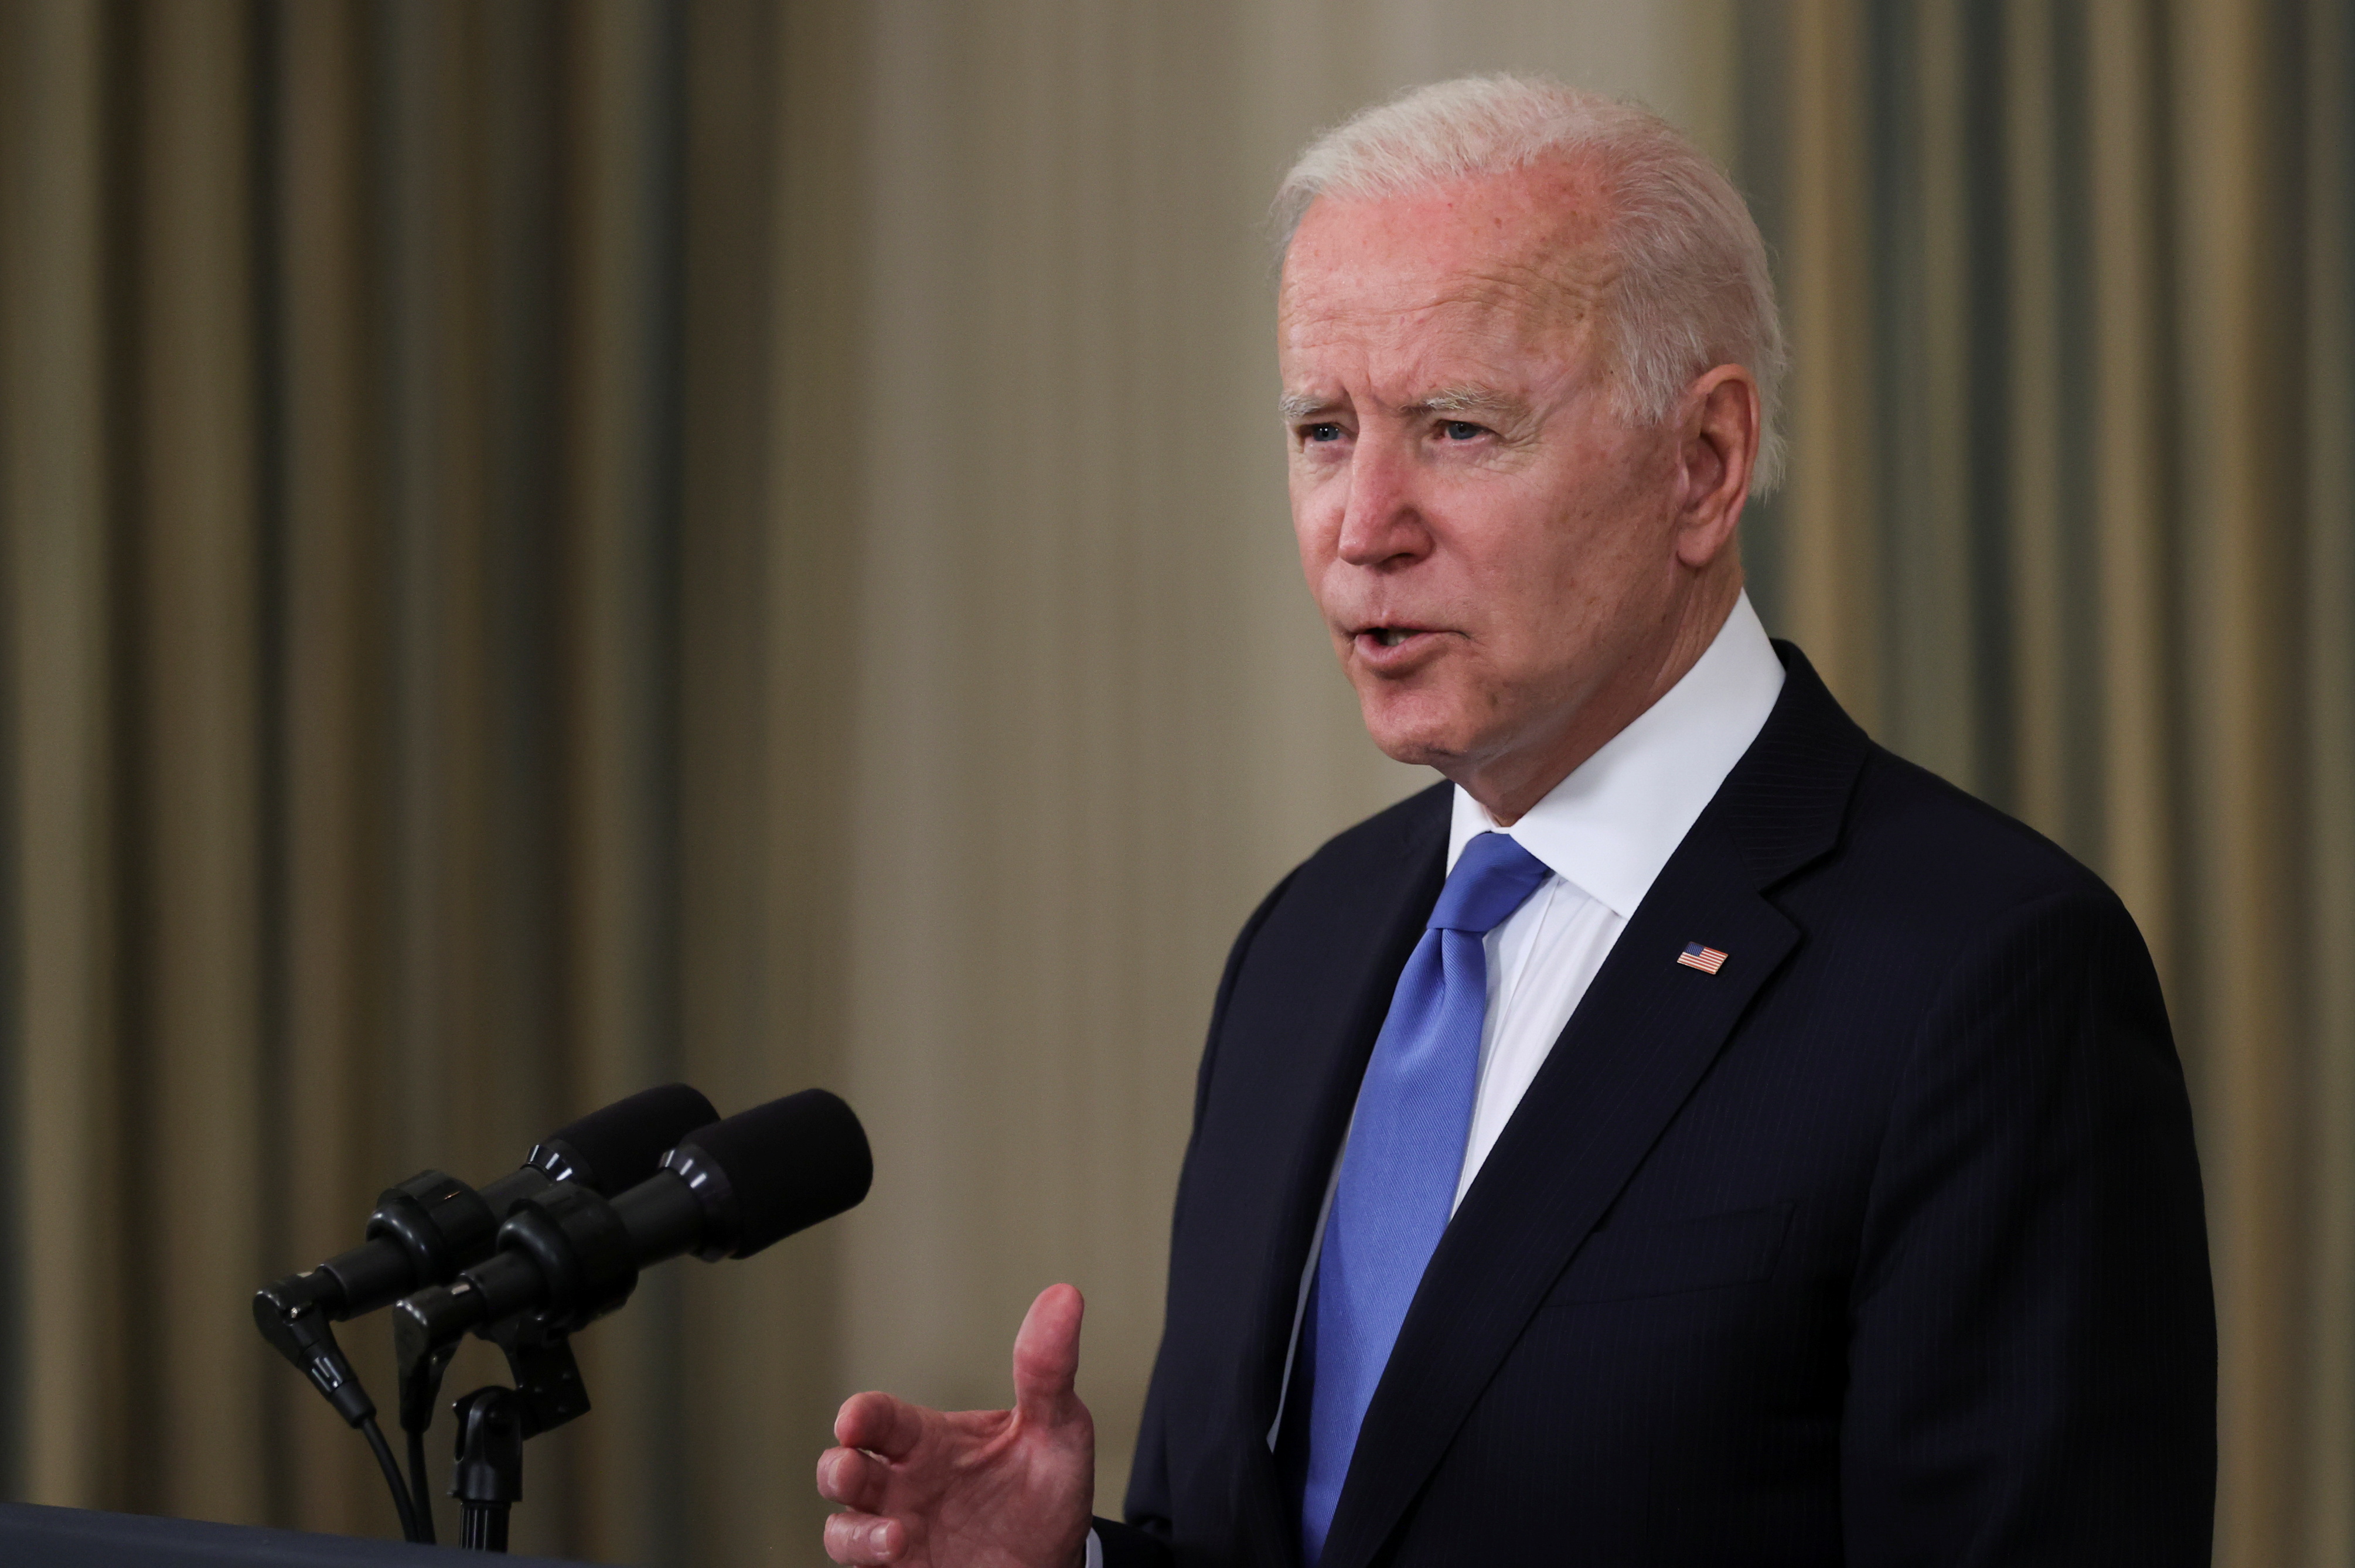 U.S. President Biden delivers remarks on the state of his American Rescue Plan at the White House in Washington